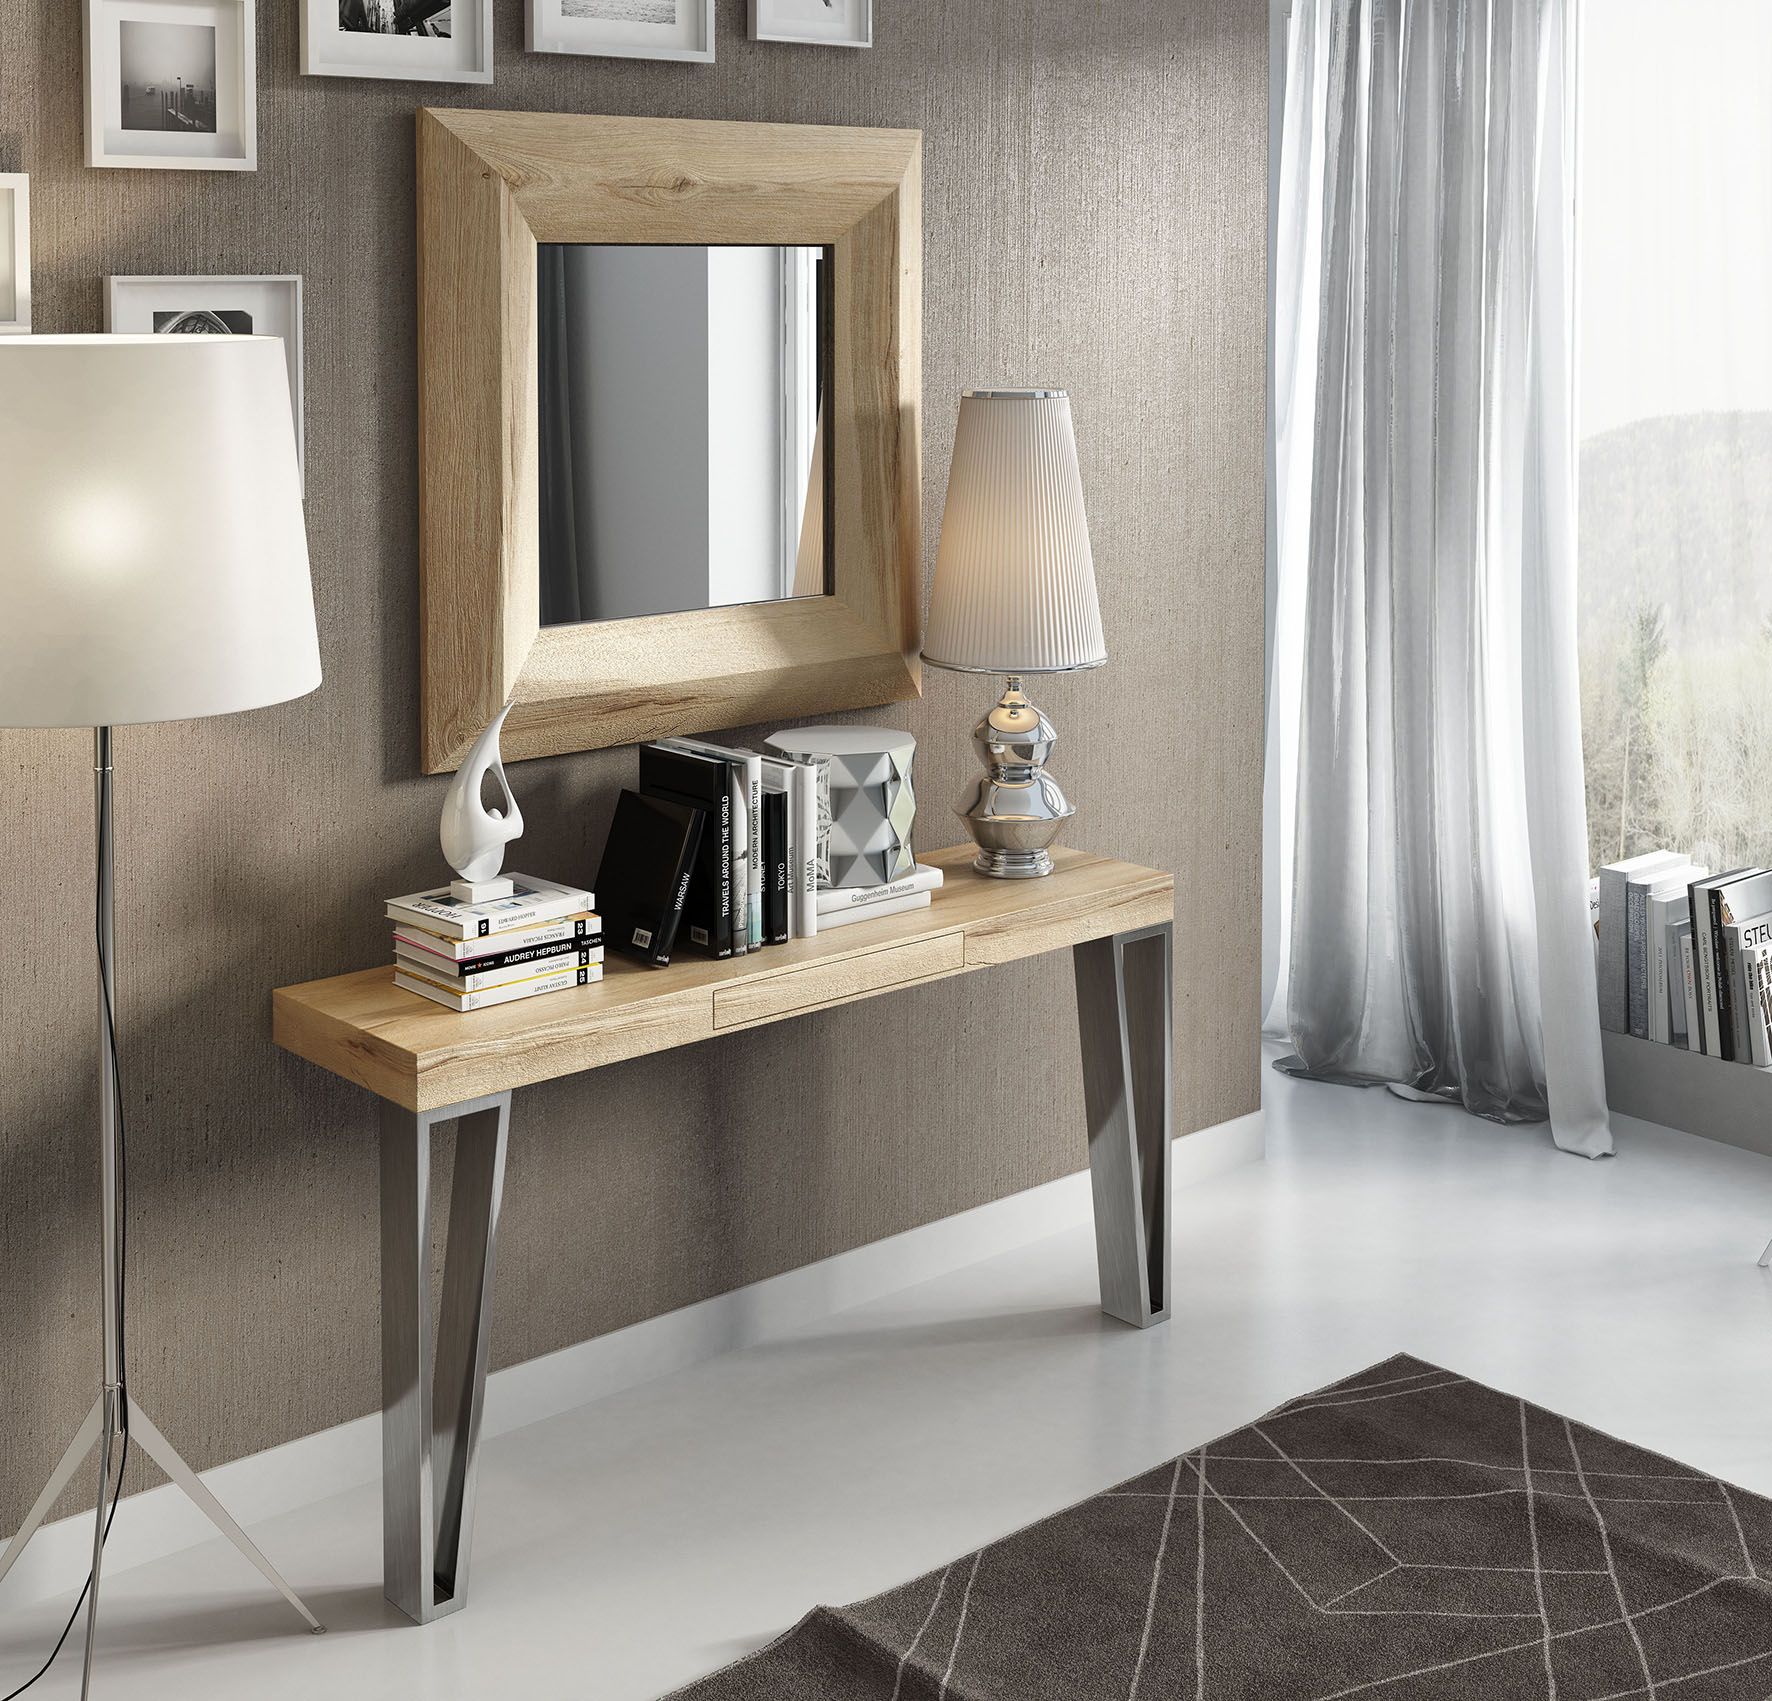 Brands Franco Serik Wall Unit Collection, Spain CII.43 Console Table